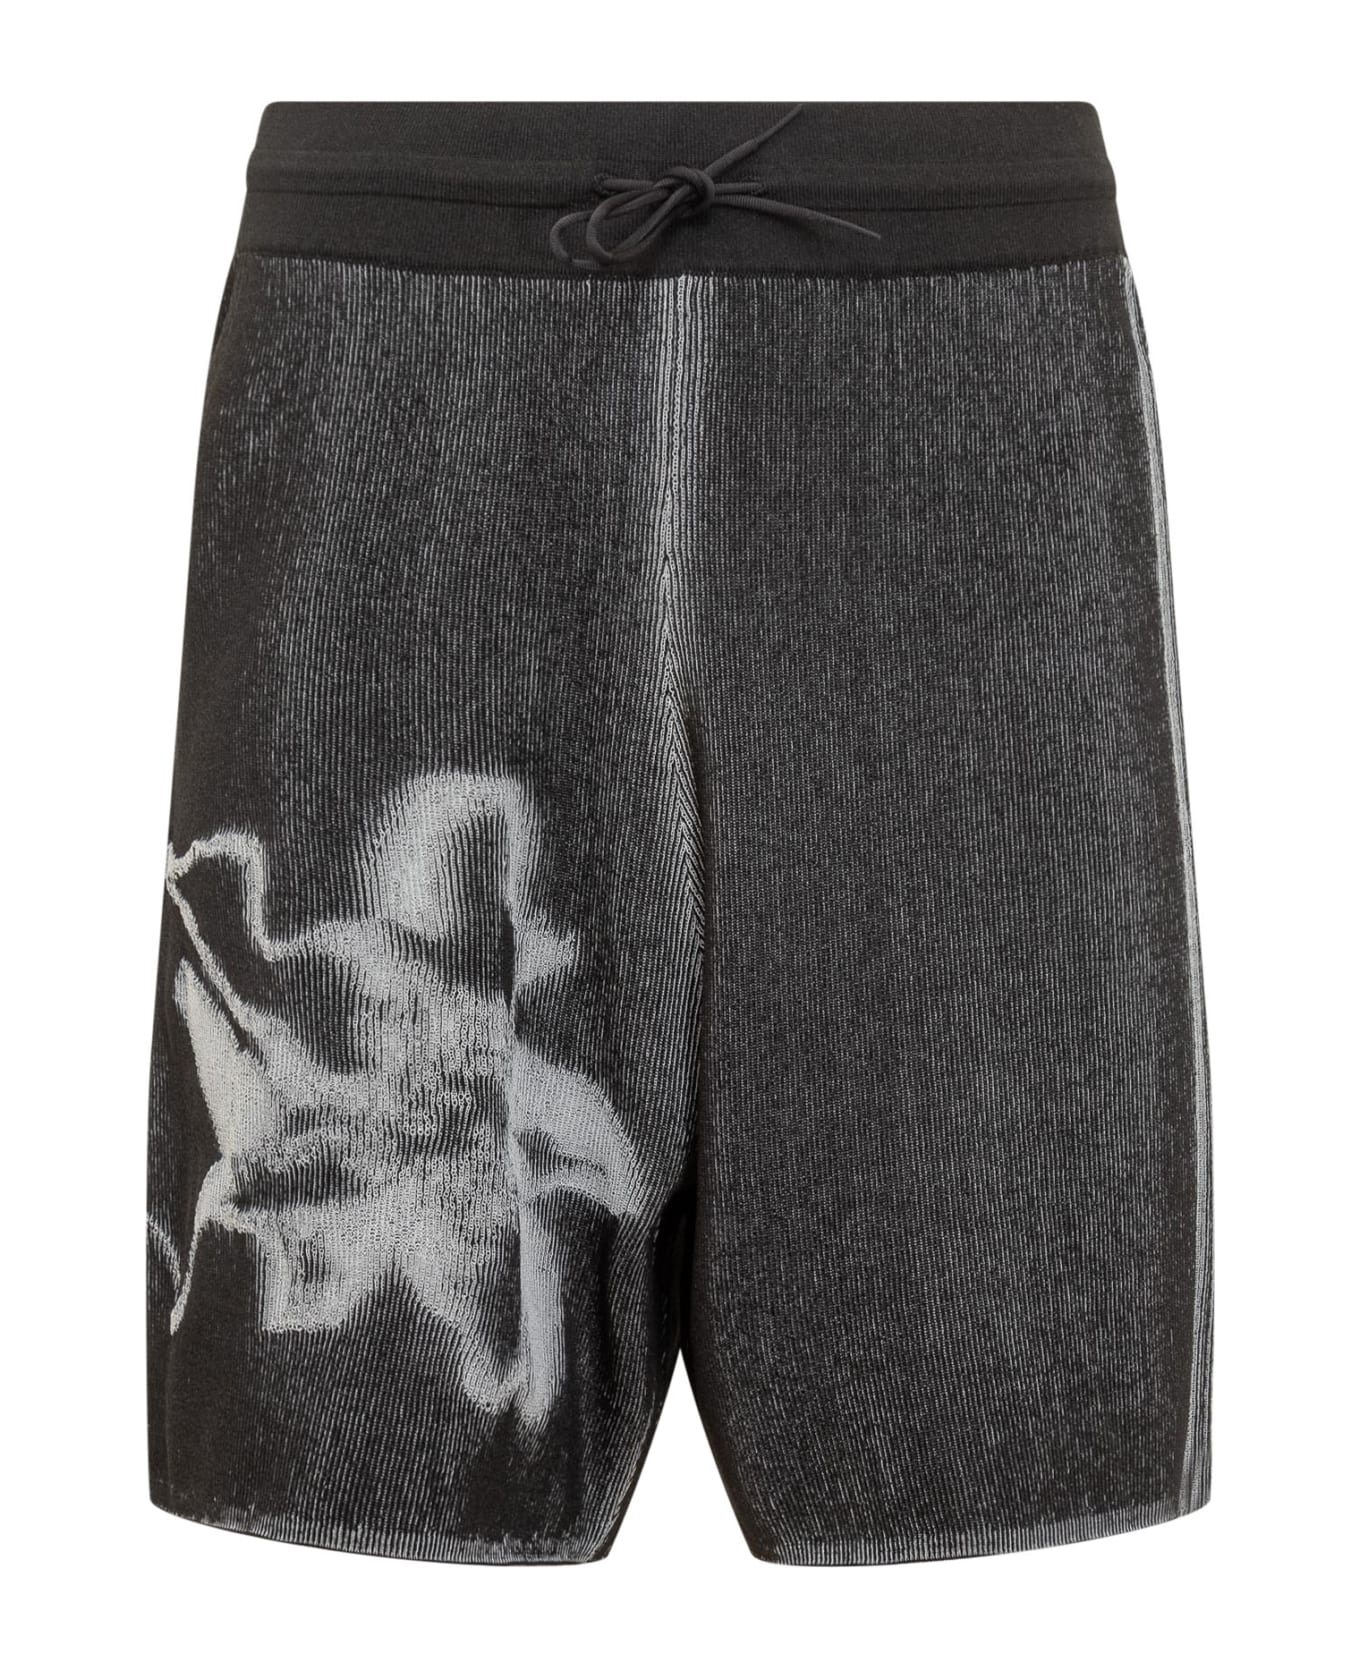 Y-3 Gfx Relaxed Fit Knit Shorts - BLACK/WHITE name:468